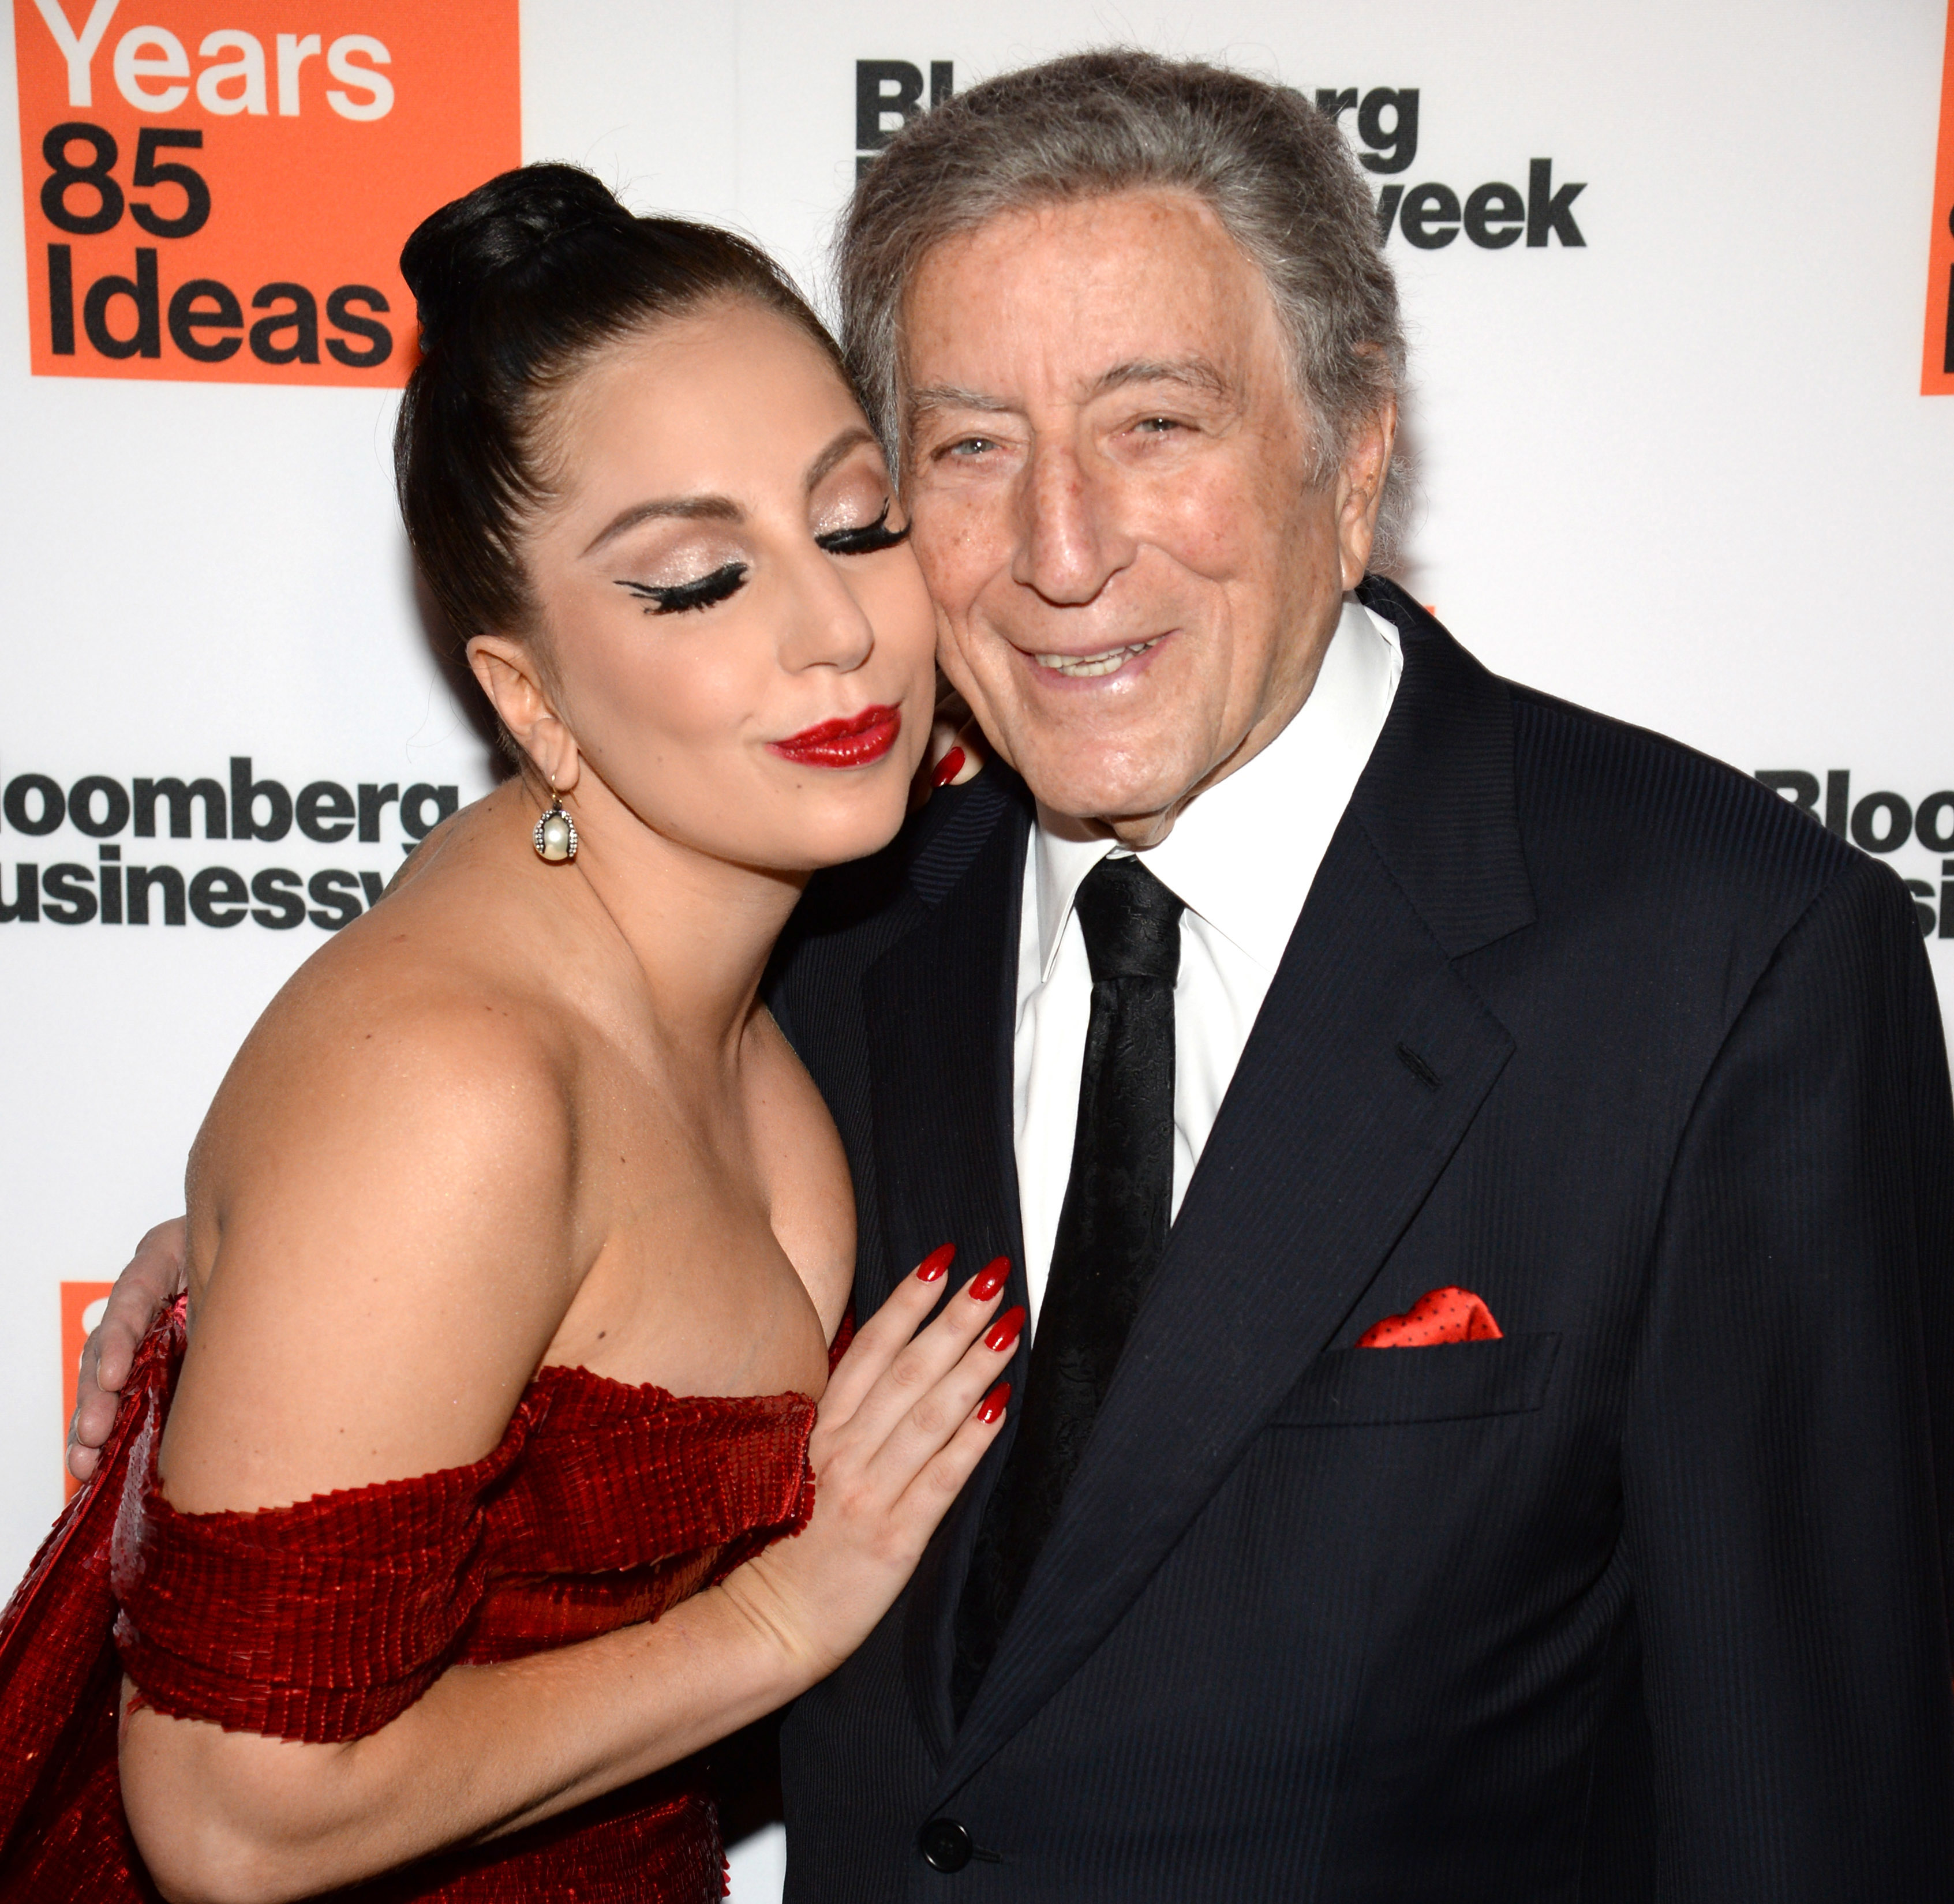 Lady Gaga and Tony Bennett on the red carpet at a media event